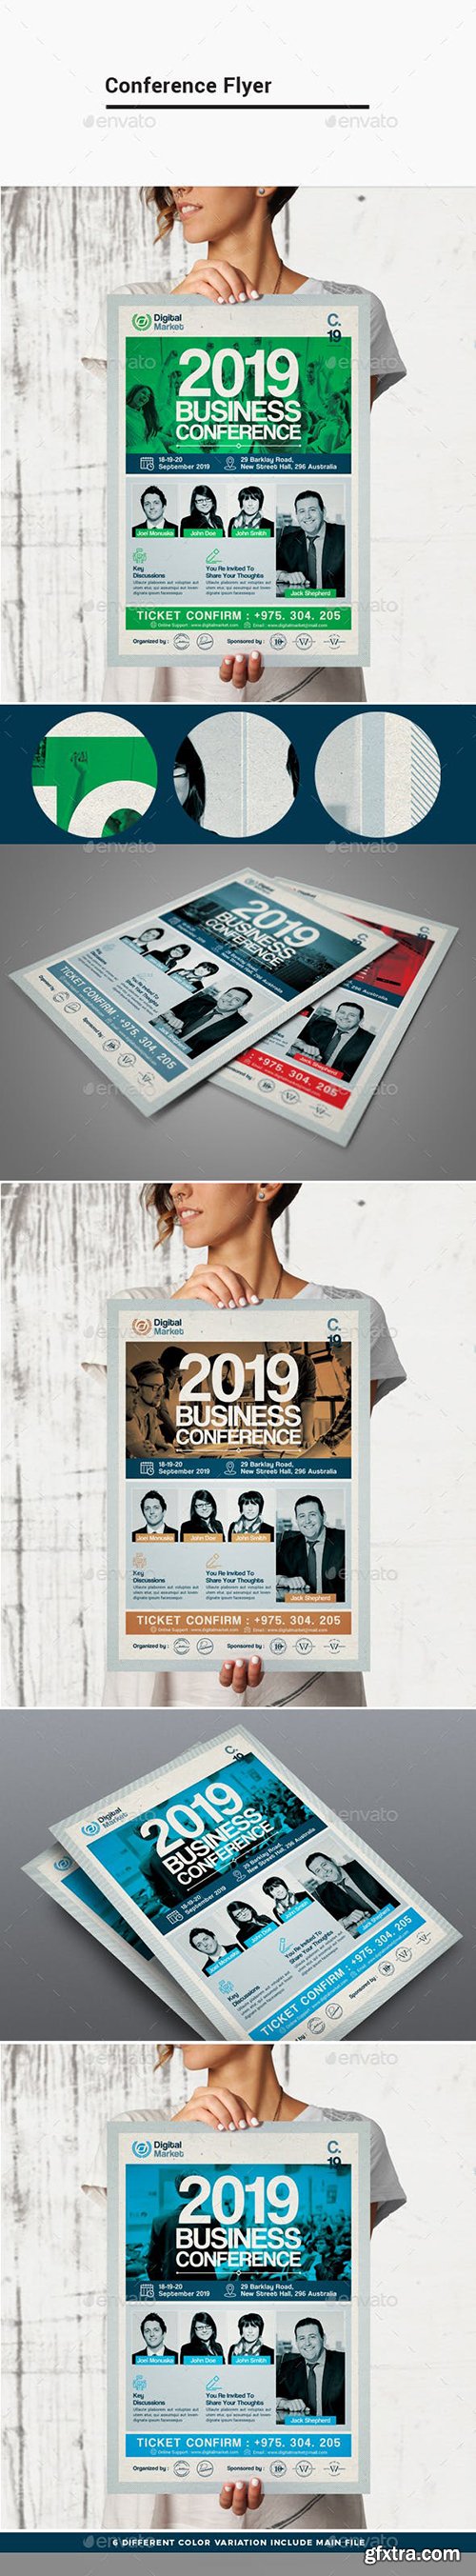 Graphicriver - Conference Flyer Template 23189450